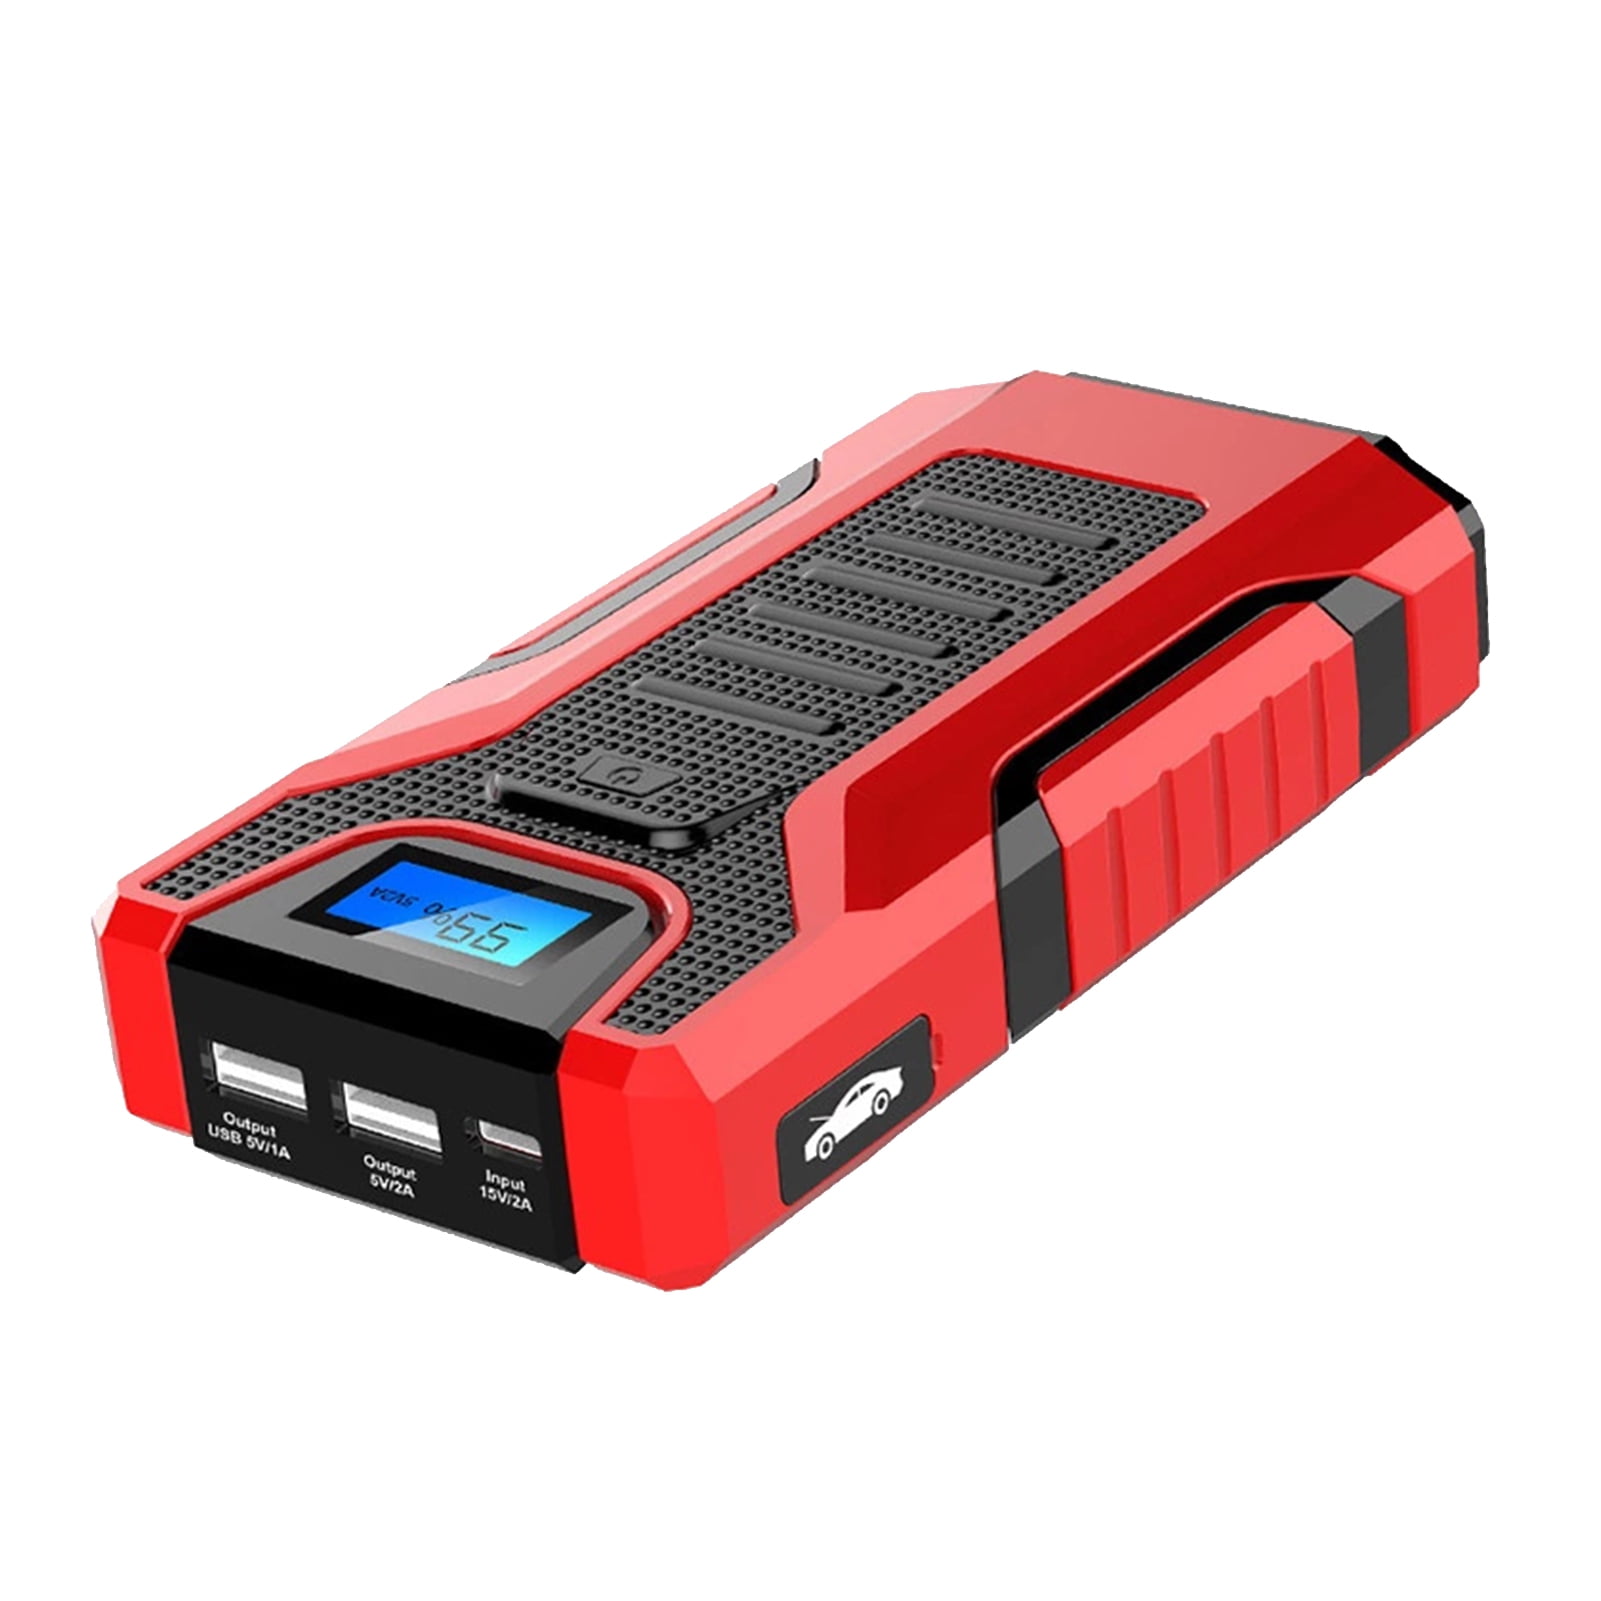 Smart Safe Auto Booster Pack with QC3.0 & 5V 2.4A Upgraded USB Outputs up to 8.0L Gas/7.0L Diesel Engines 1600A Peak 20000mAh Portable Car Battery Charger BUTURE Car Jump Starter 